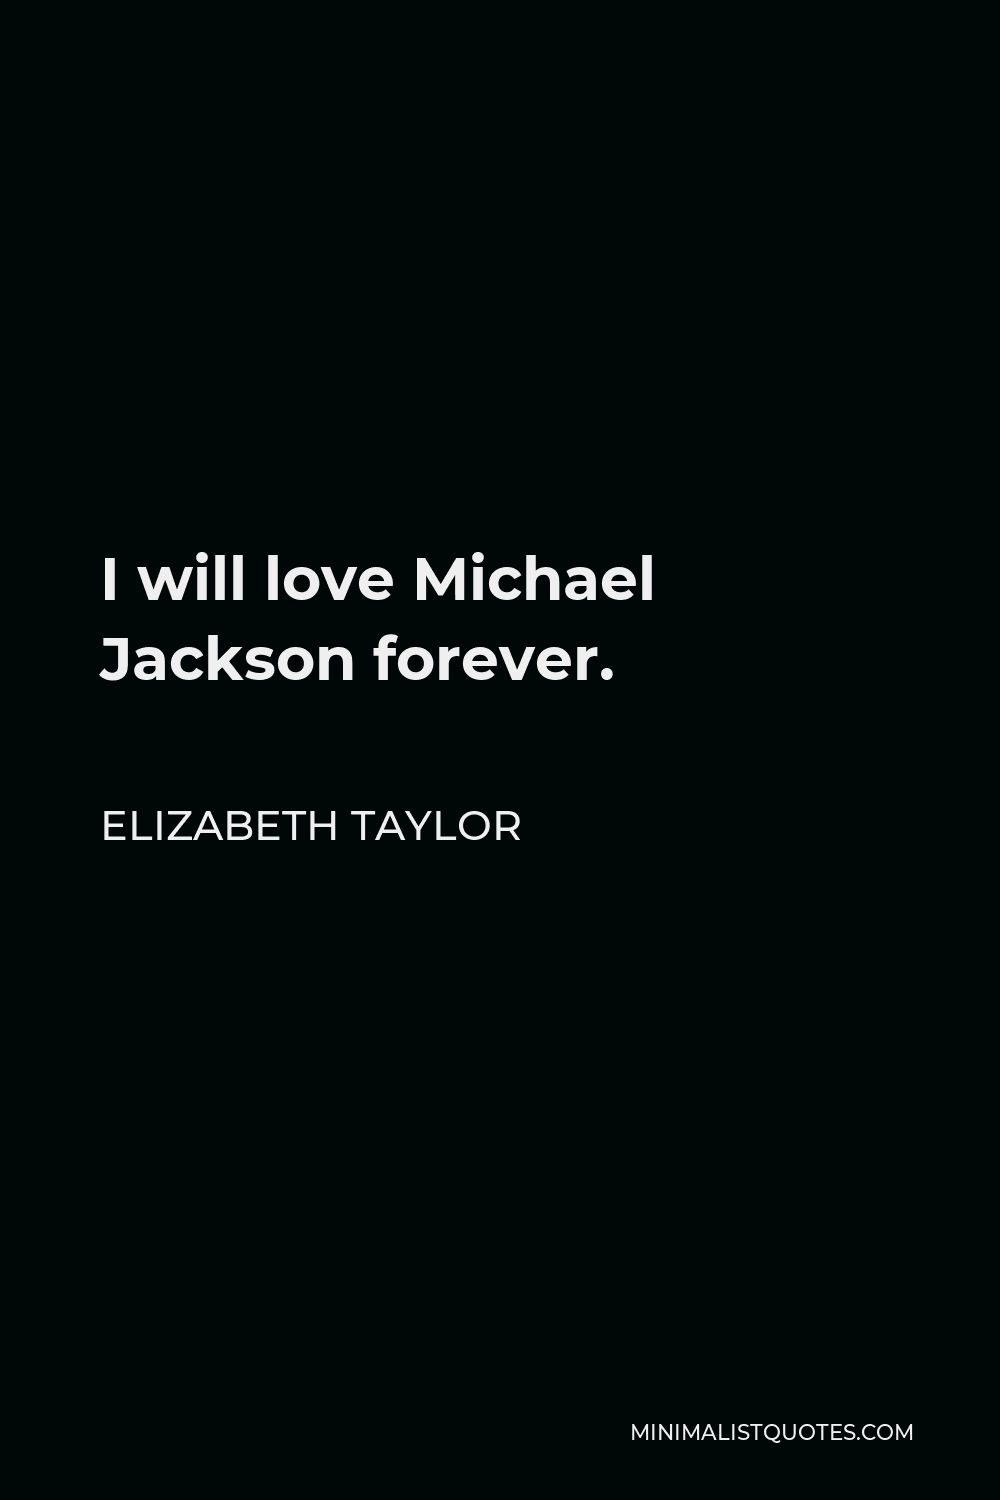 Elizabeth Taylor Quote - I will love Michael Jackson forever.